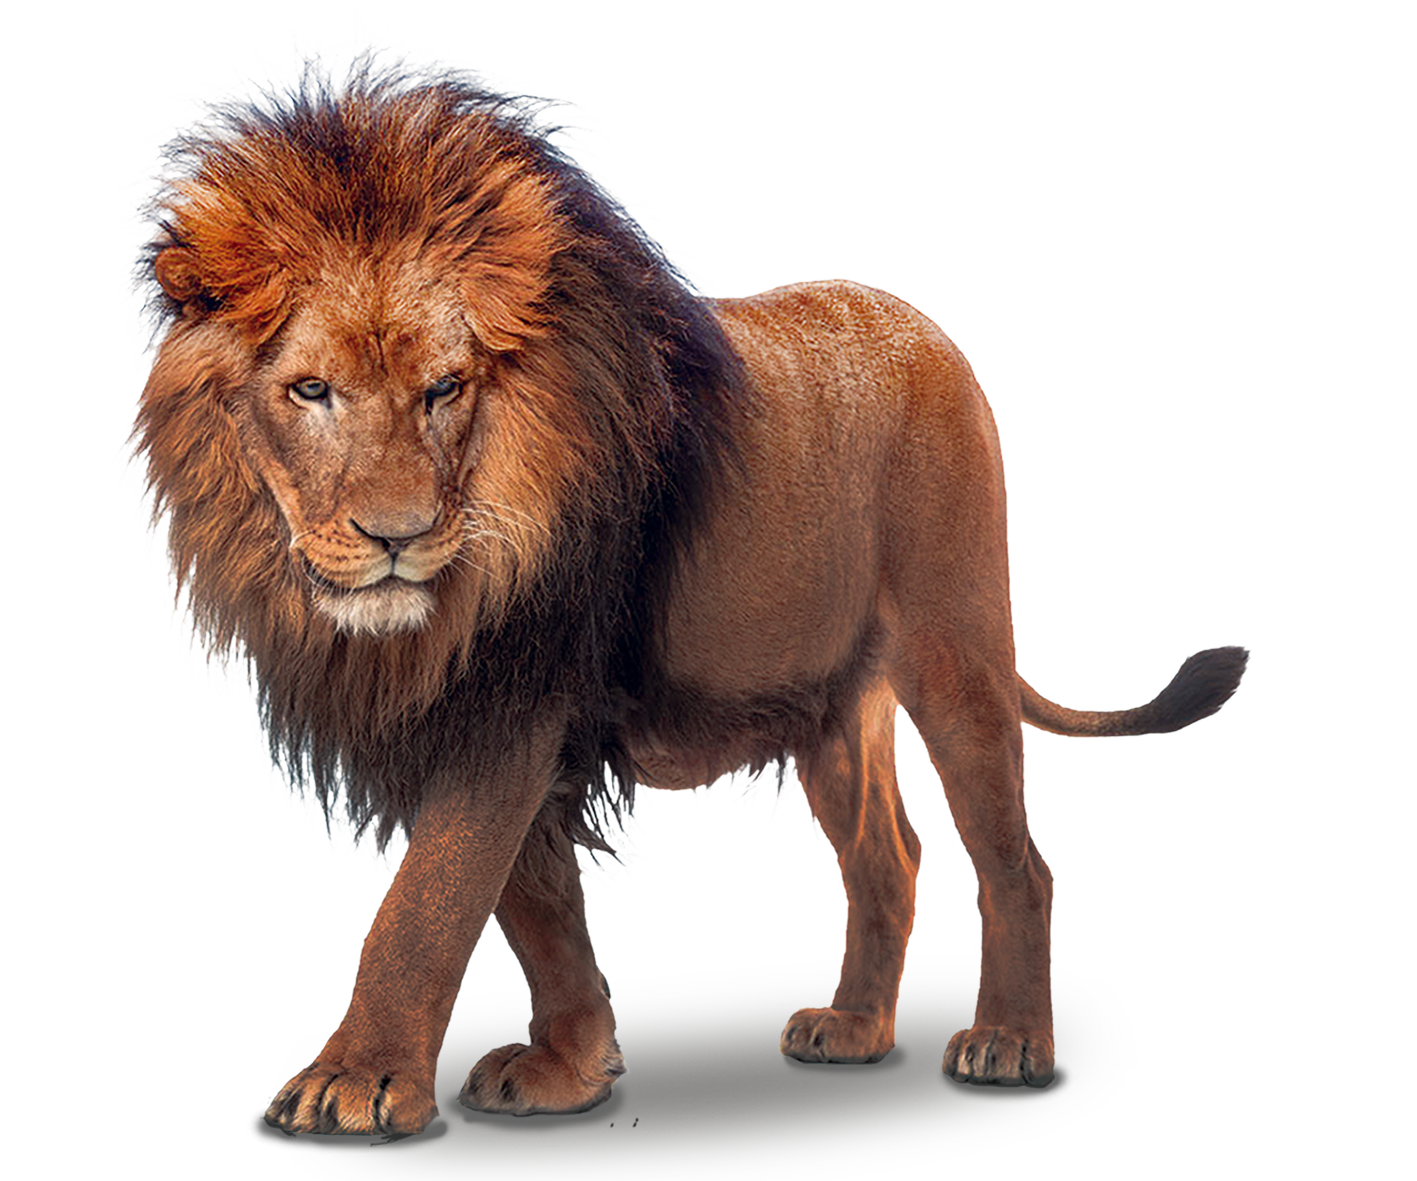 Lion PNG Image High Quality Clipart